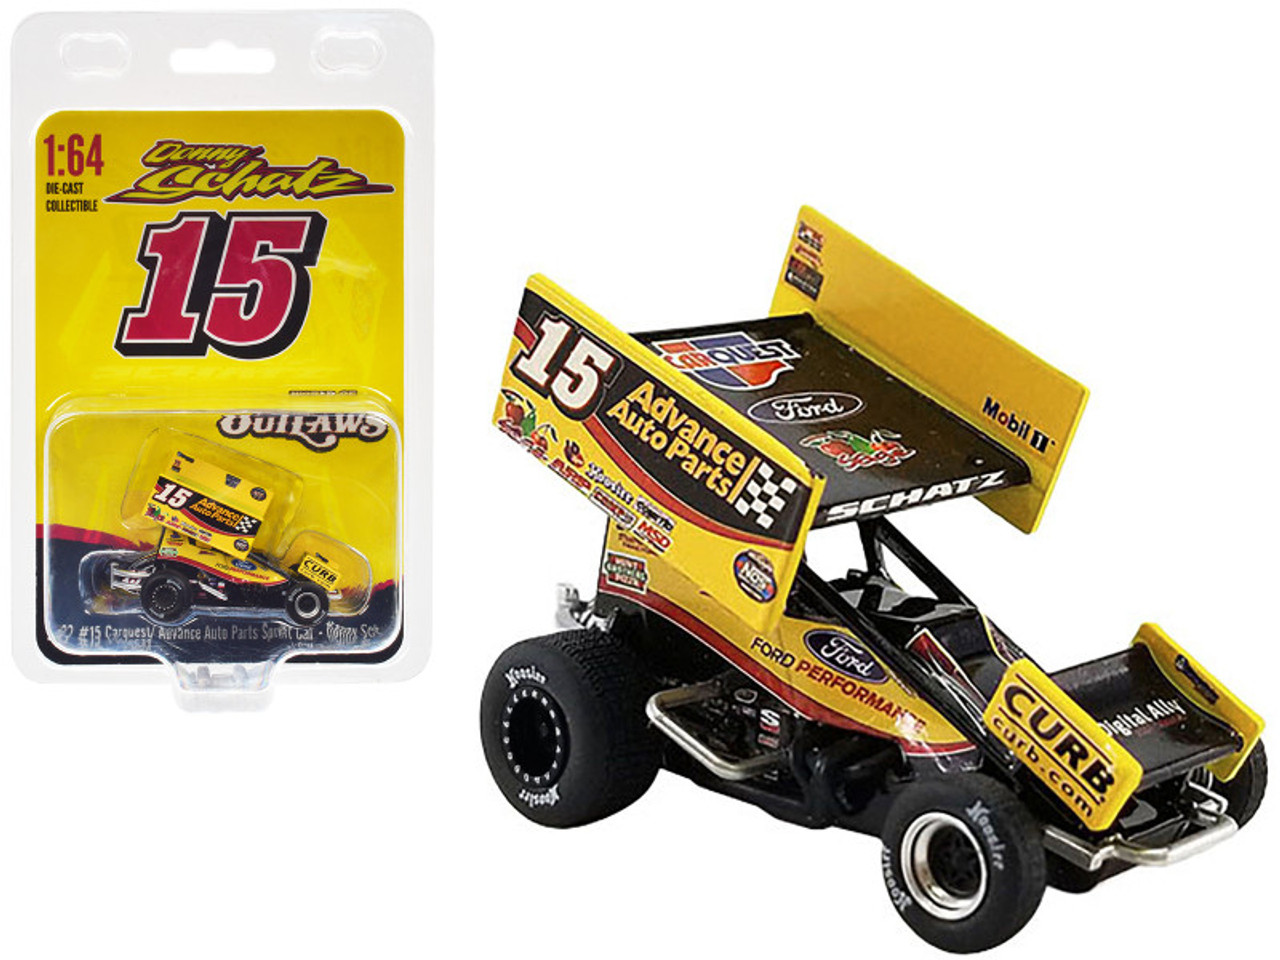 Winged Sprint Car #15 Donny Schatz "Advance Auto Parts" Tony Stewart Racing "World of Outlaws" (2022) 1/64 Diecast Model Car by ACME